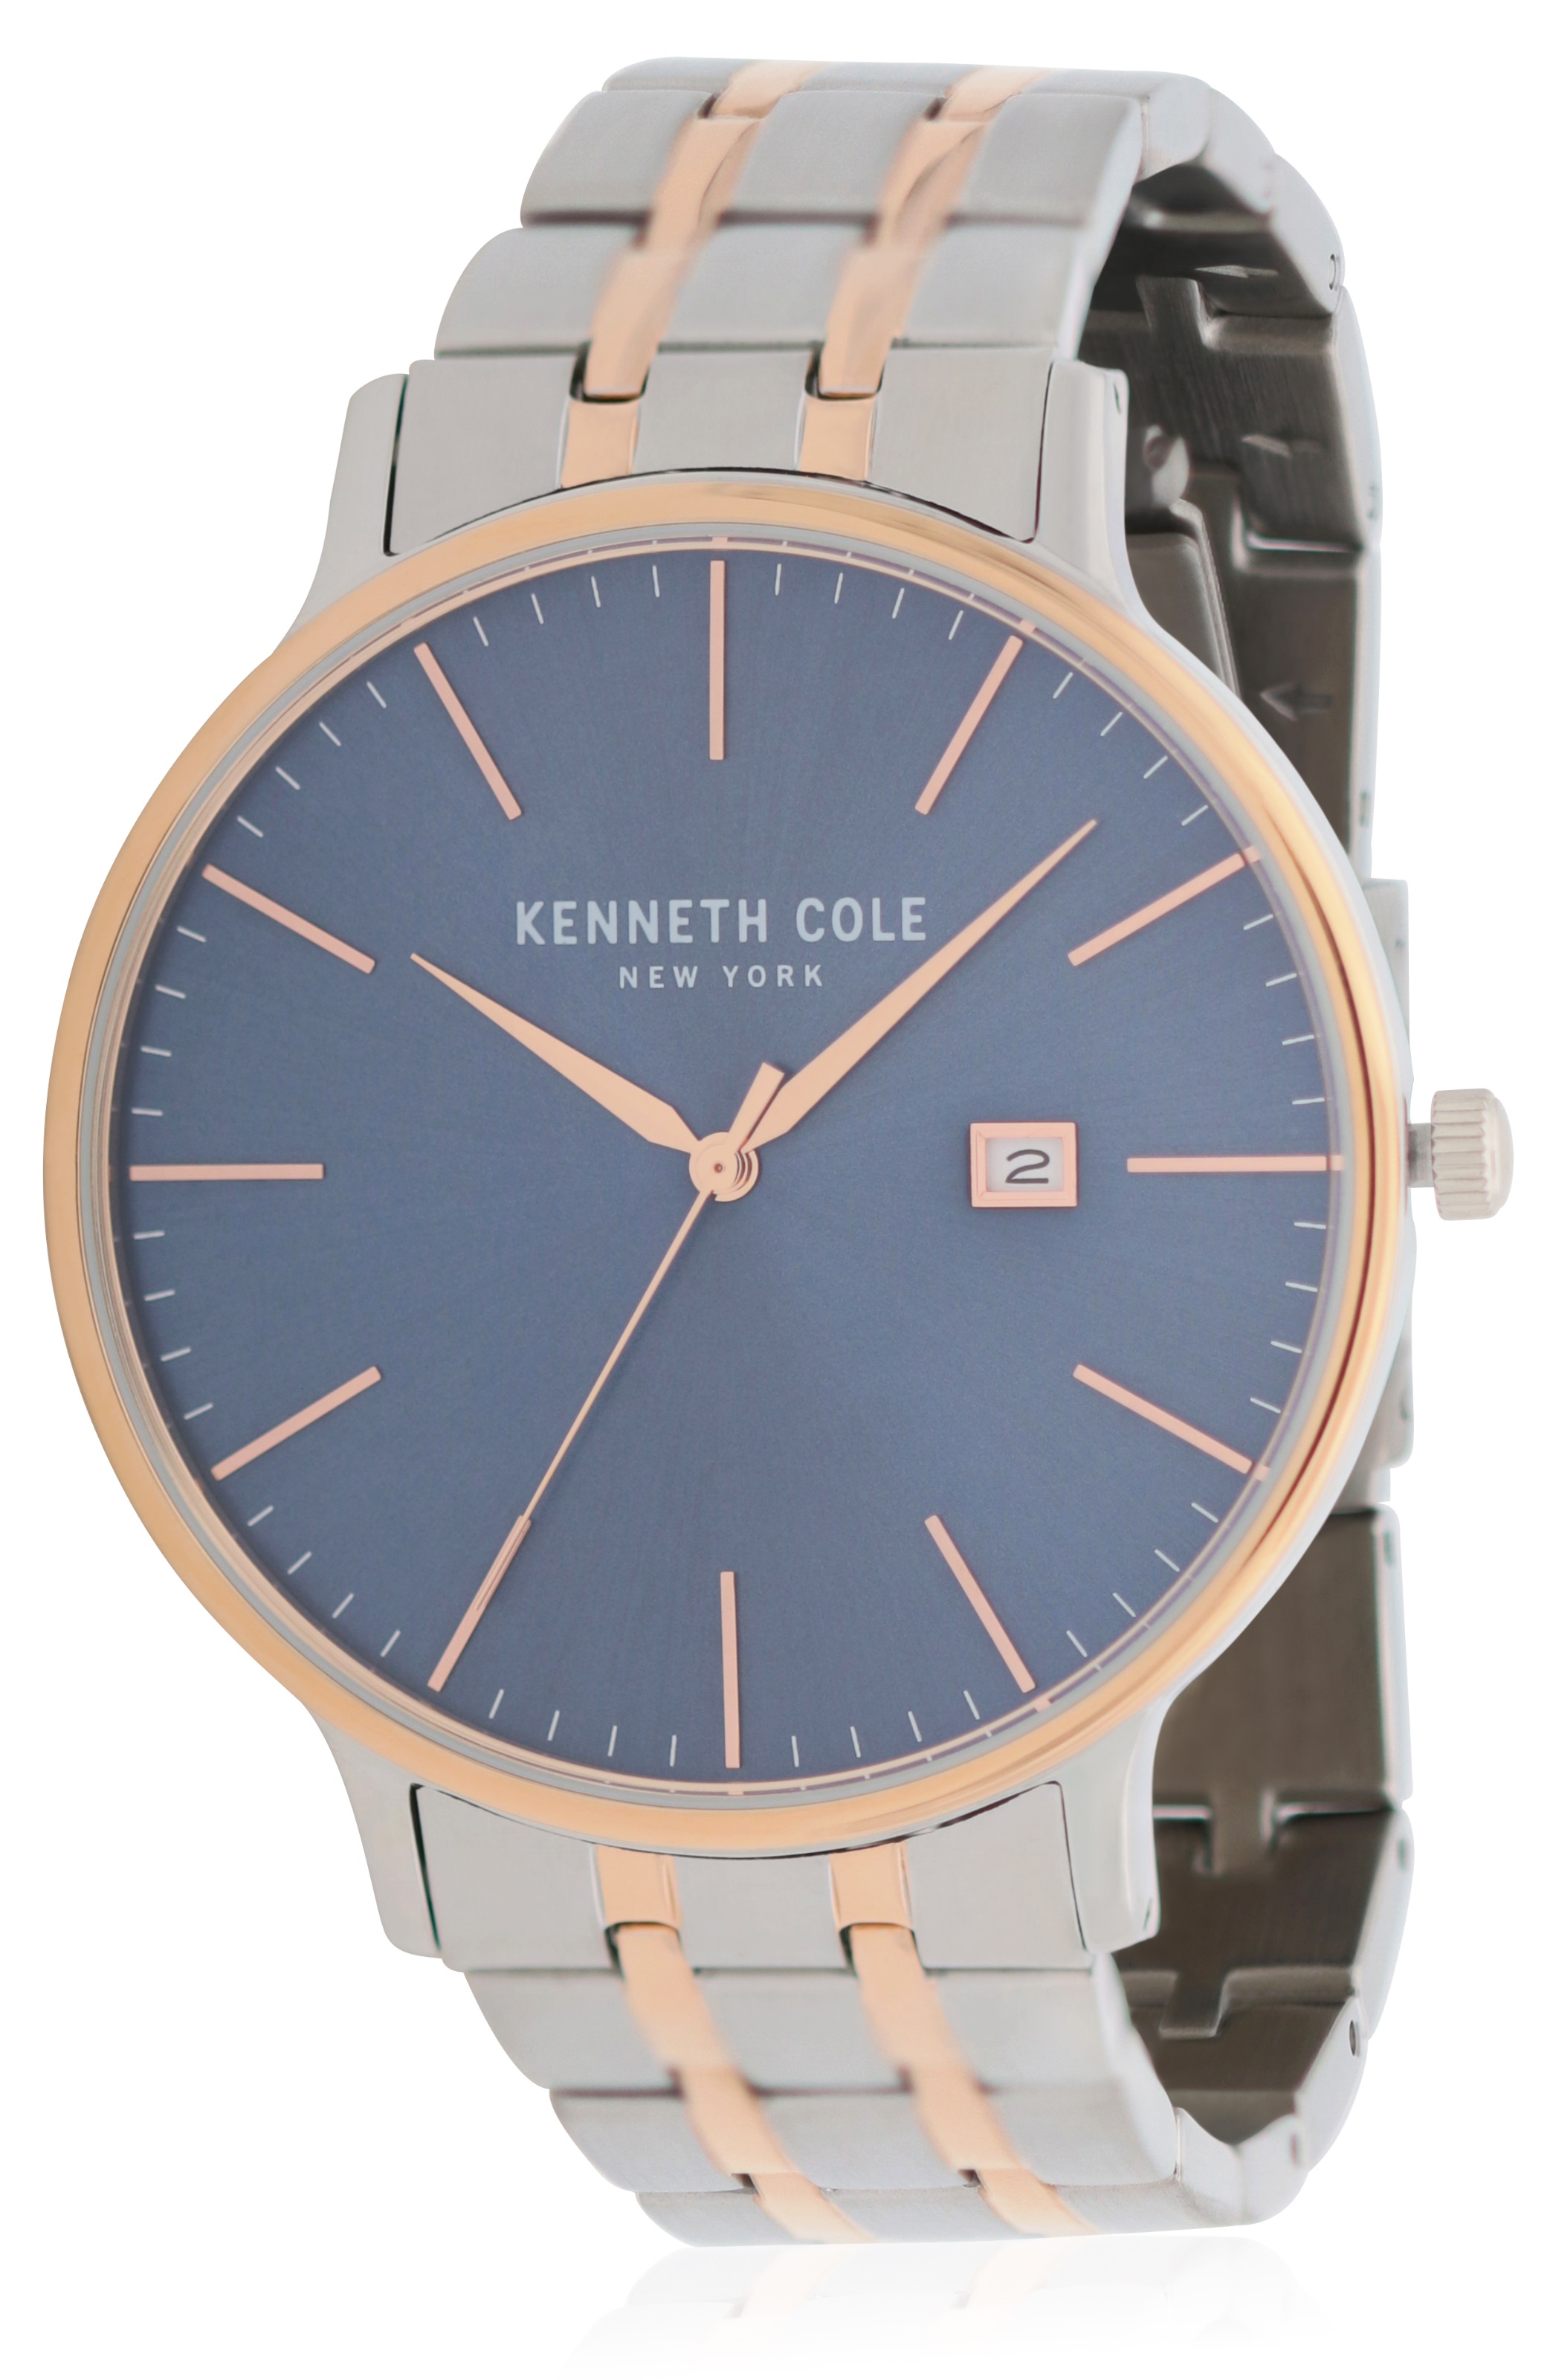 Kenneth Cole Two-Tone Mens Watch KC15095002 - (Open Box)